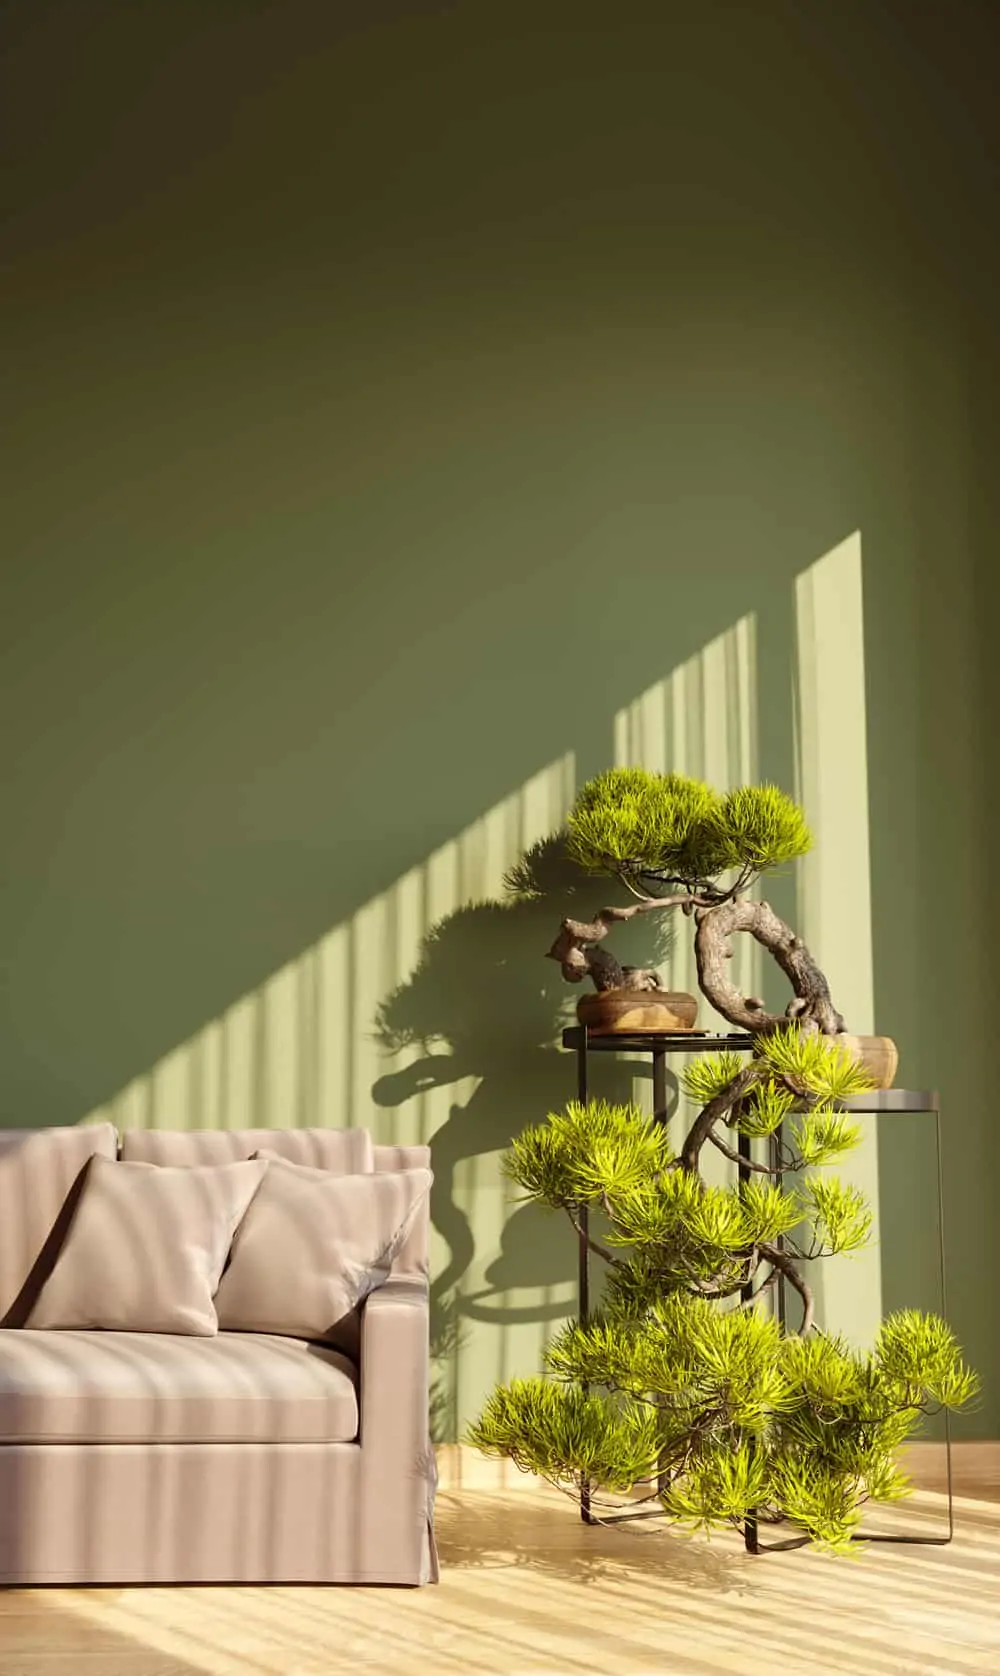 3d illustration of living room with green wall and pine bonsai. Modern green interior with plant on the stand, sunlight, shadows and copy space.